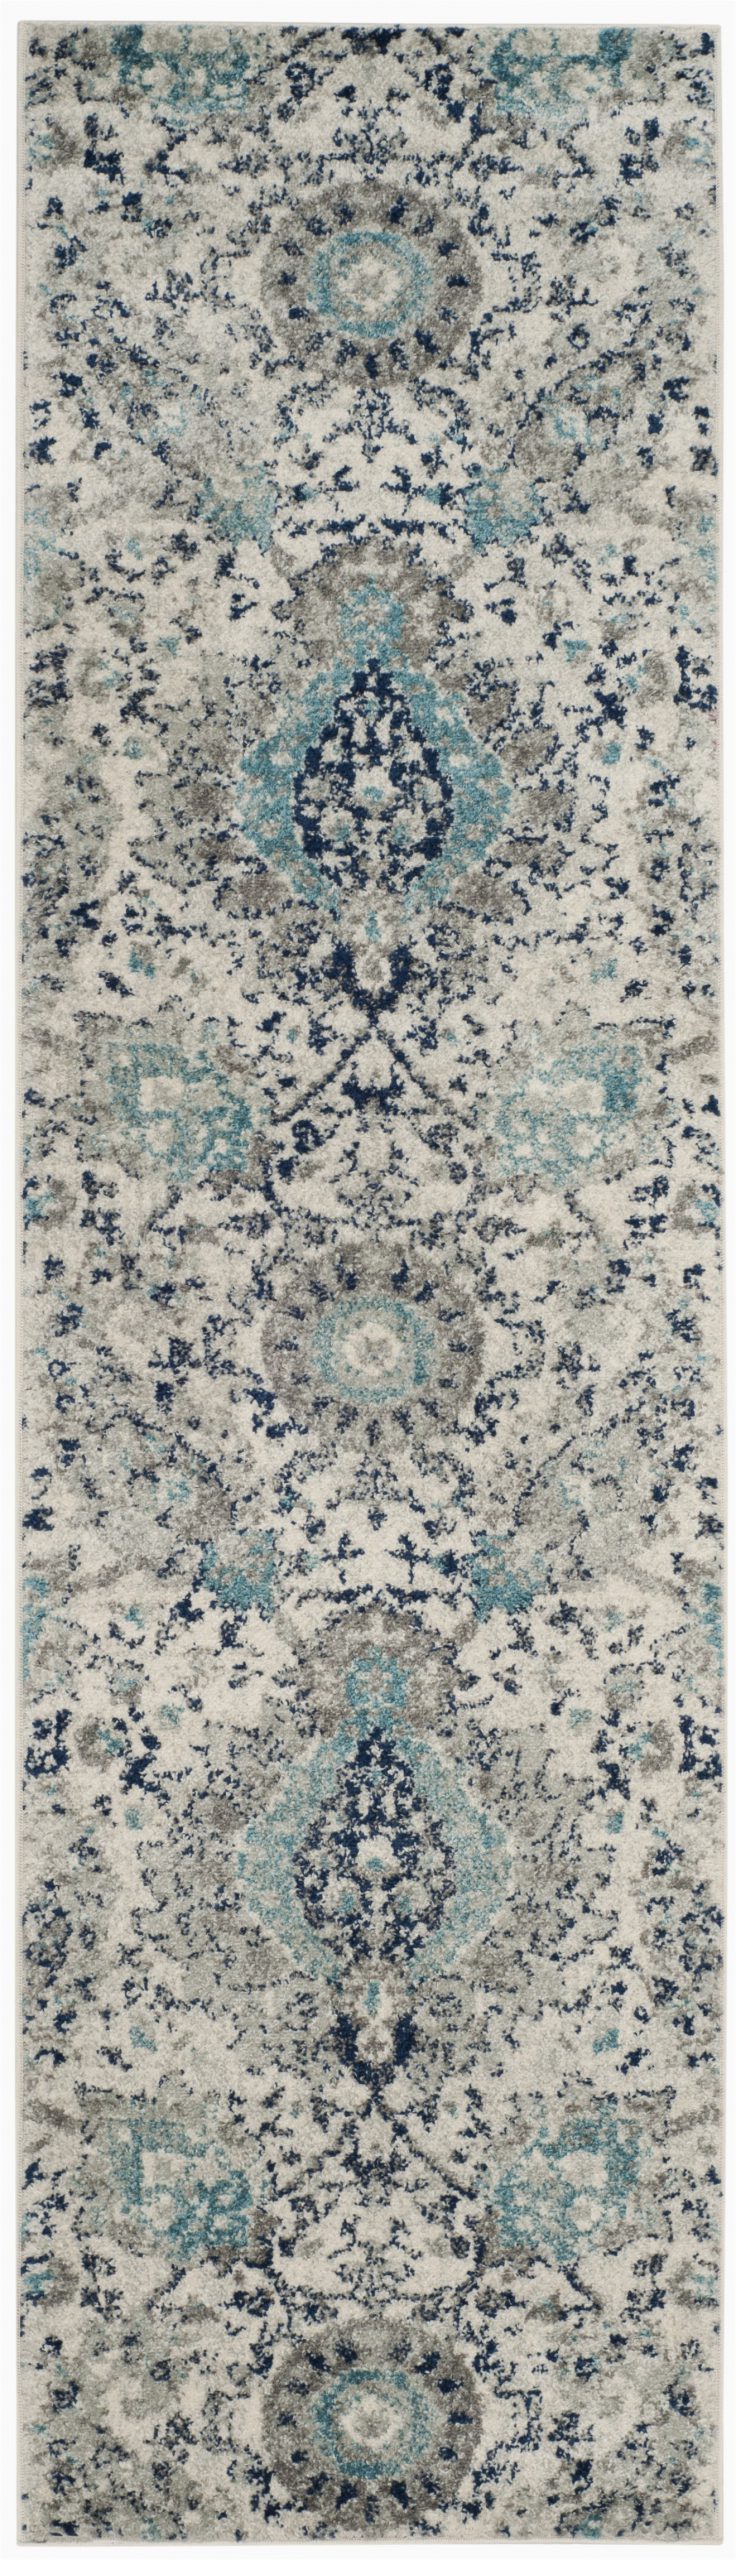 Lowes area Rugs 10 X 14 Safavieh Madison 8 Ft X 10 Ft Navy and Creme Indoor Rectangular Border Woven area Rug